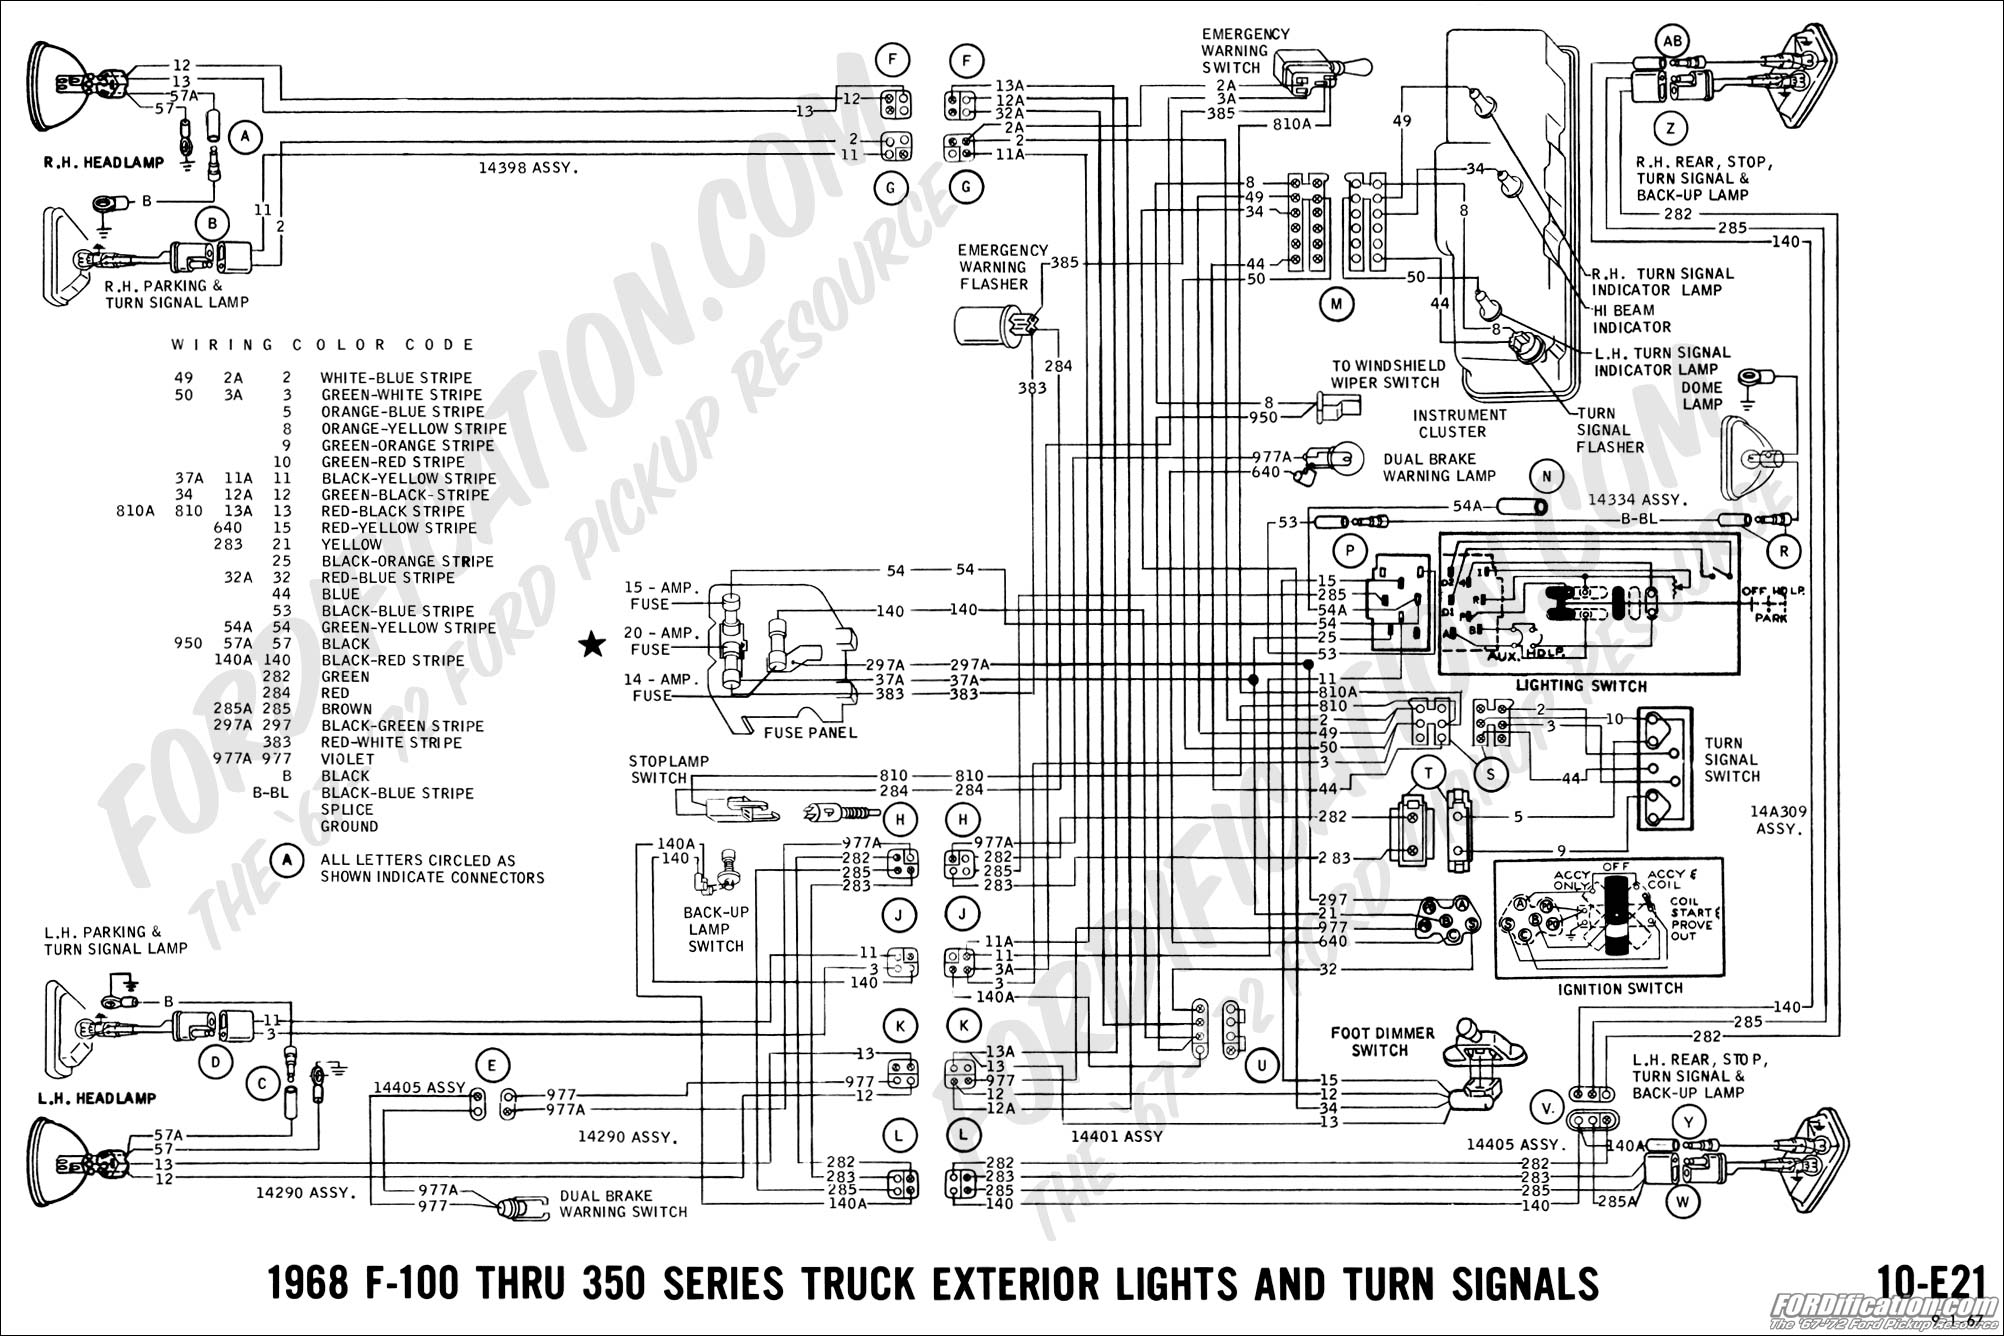 1977 Ford F150 Ignition Switch Wiring Diagram from www.fordification.com